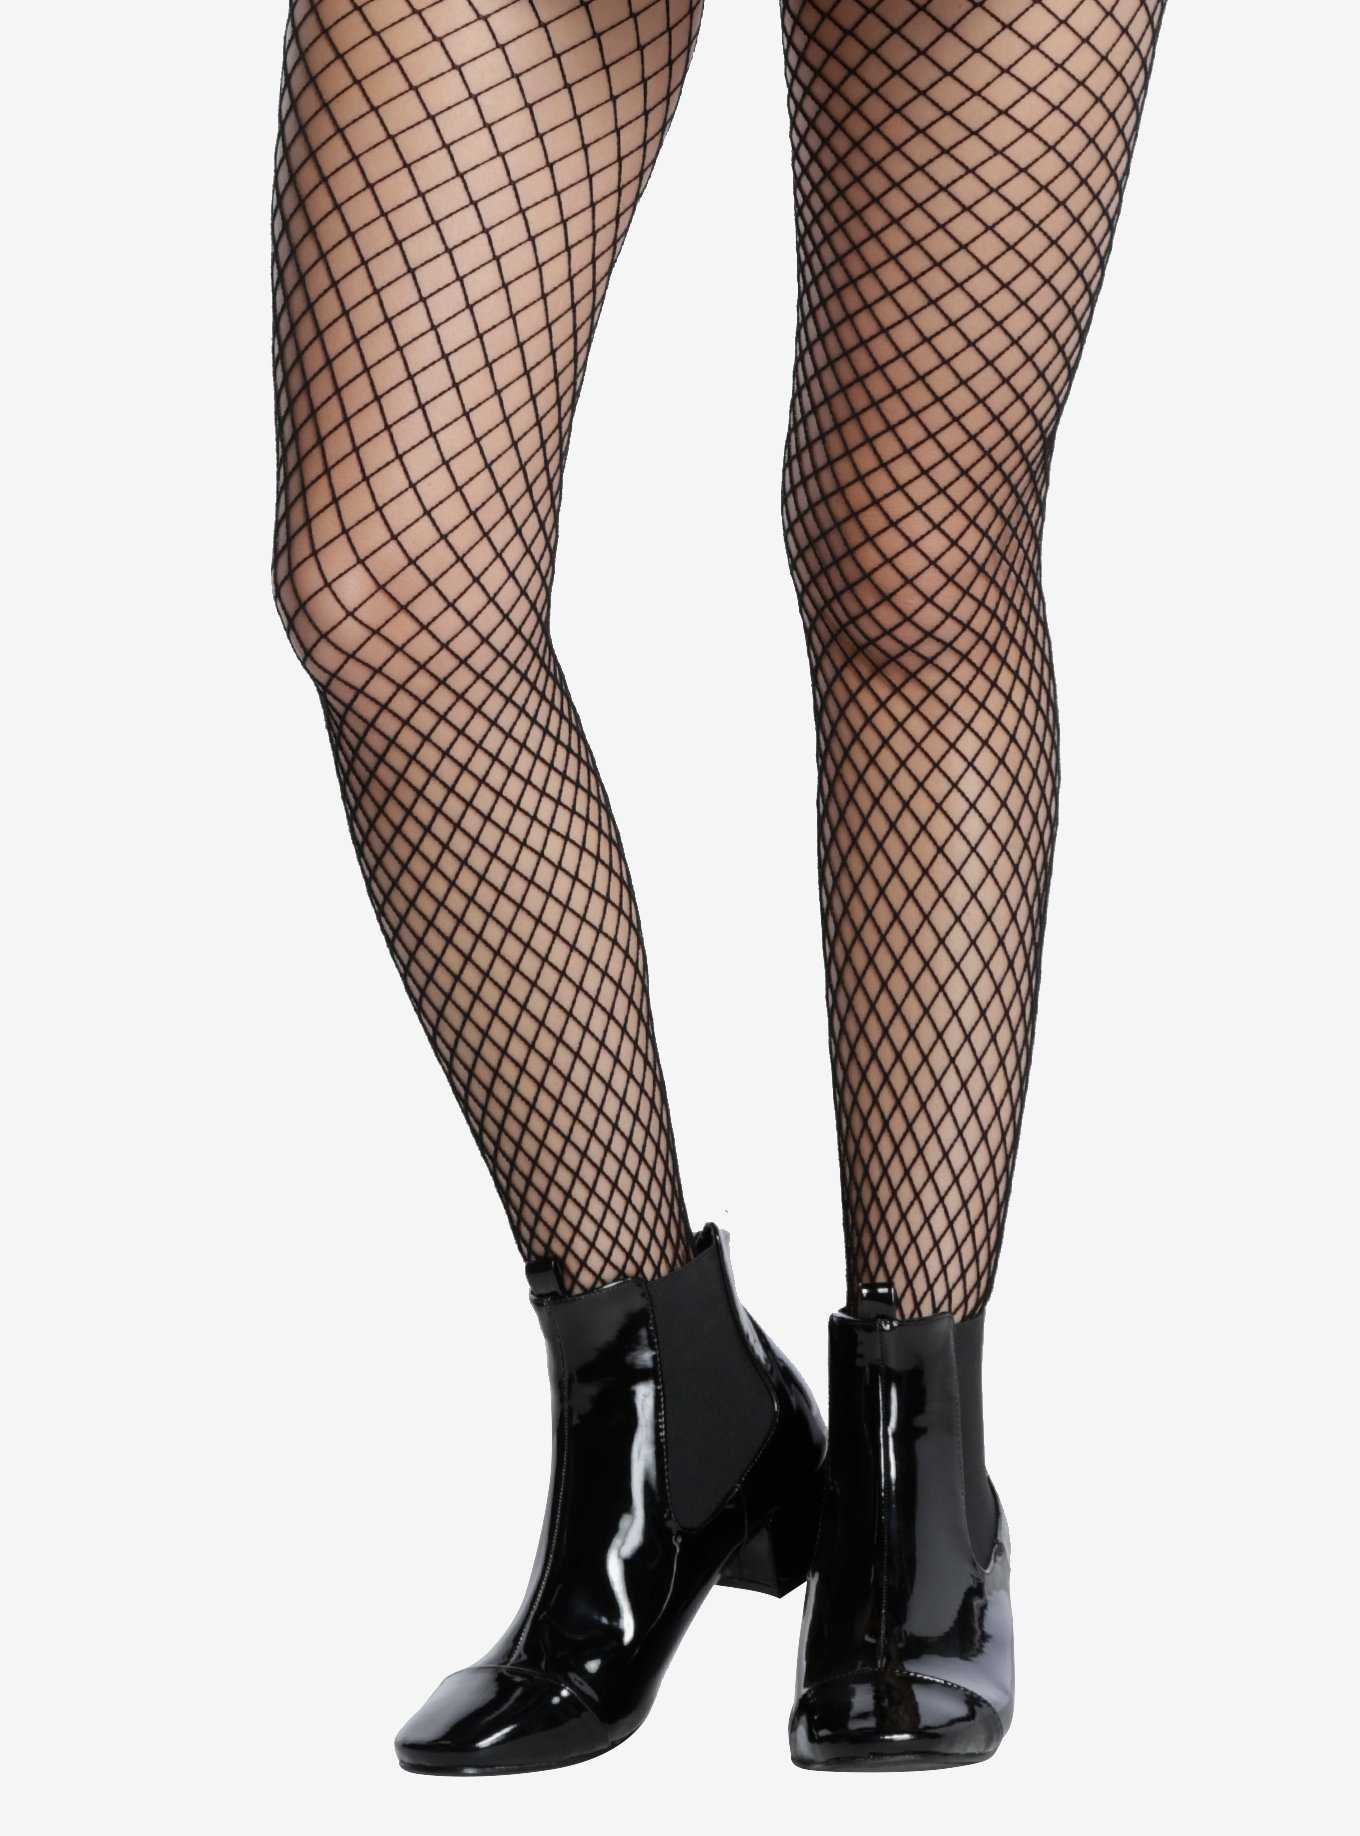 Glow in the Dark Fishnet Stockings - Aesthetic Clothes Shop